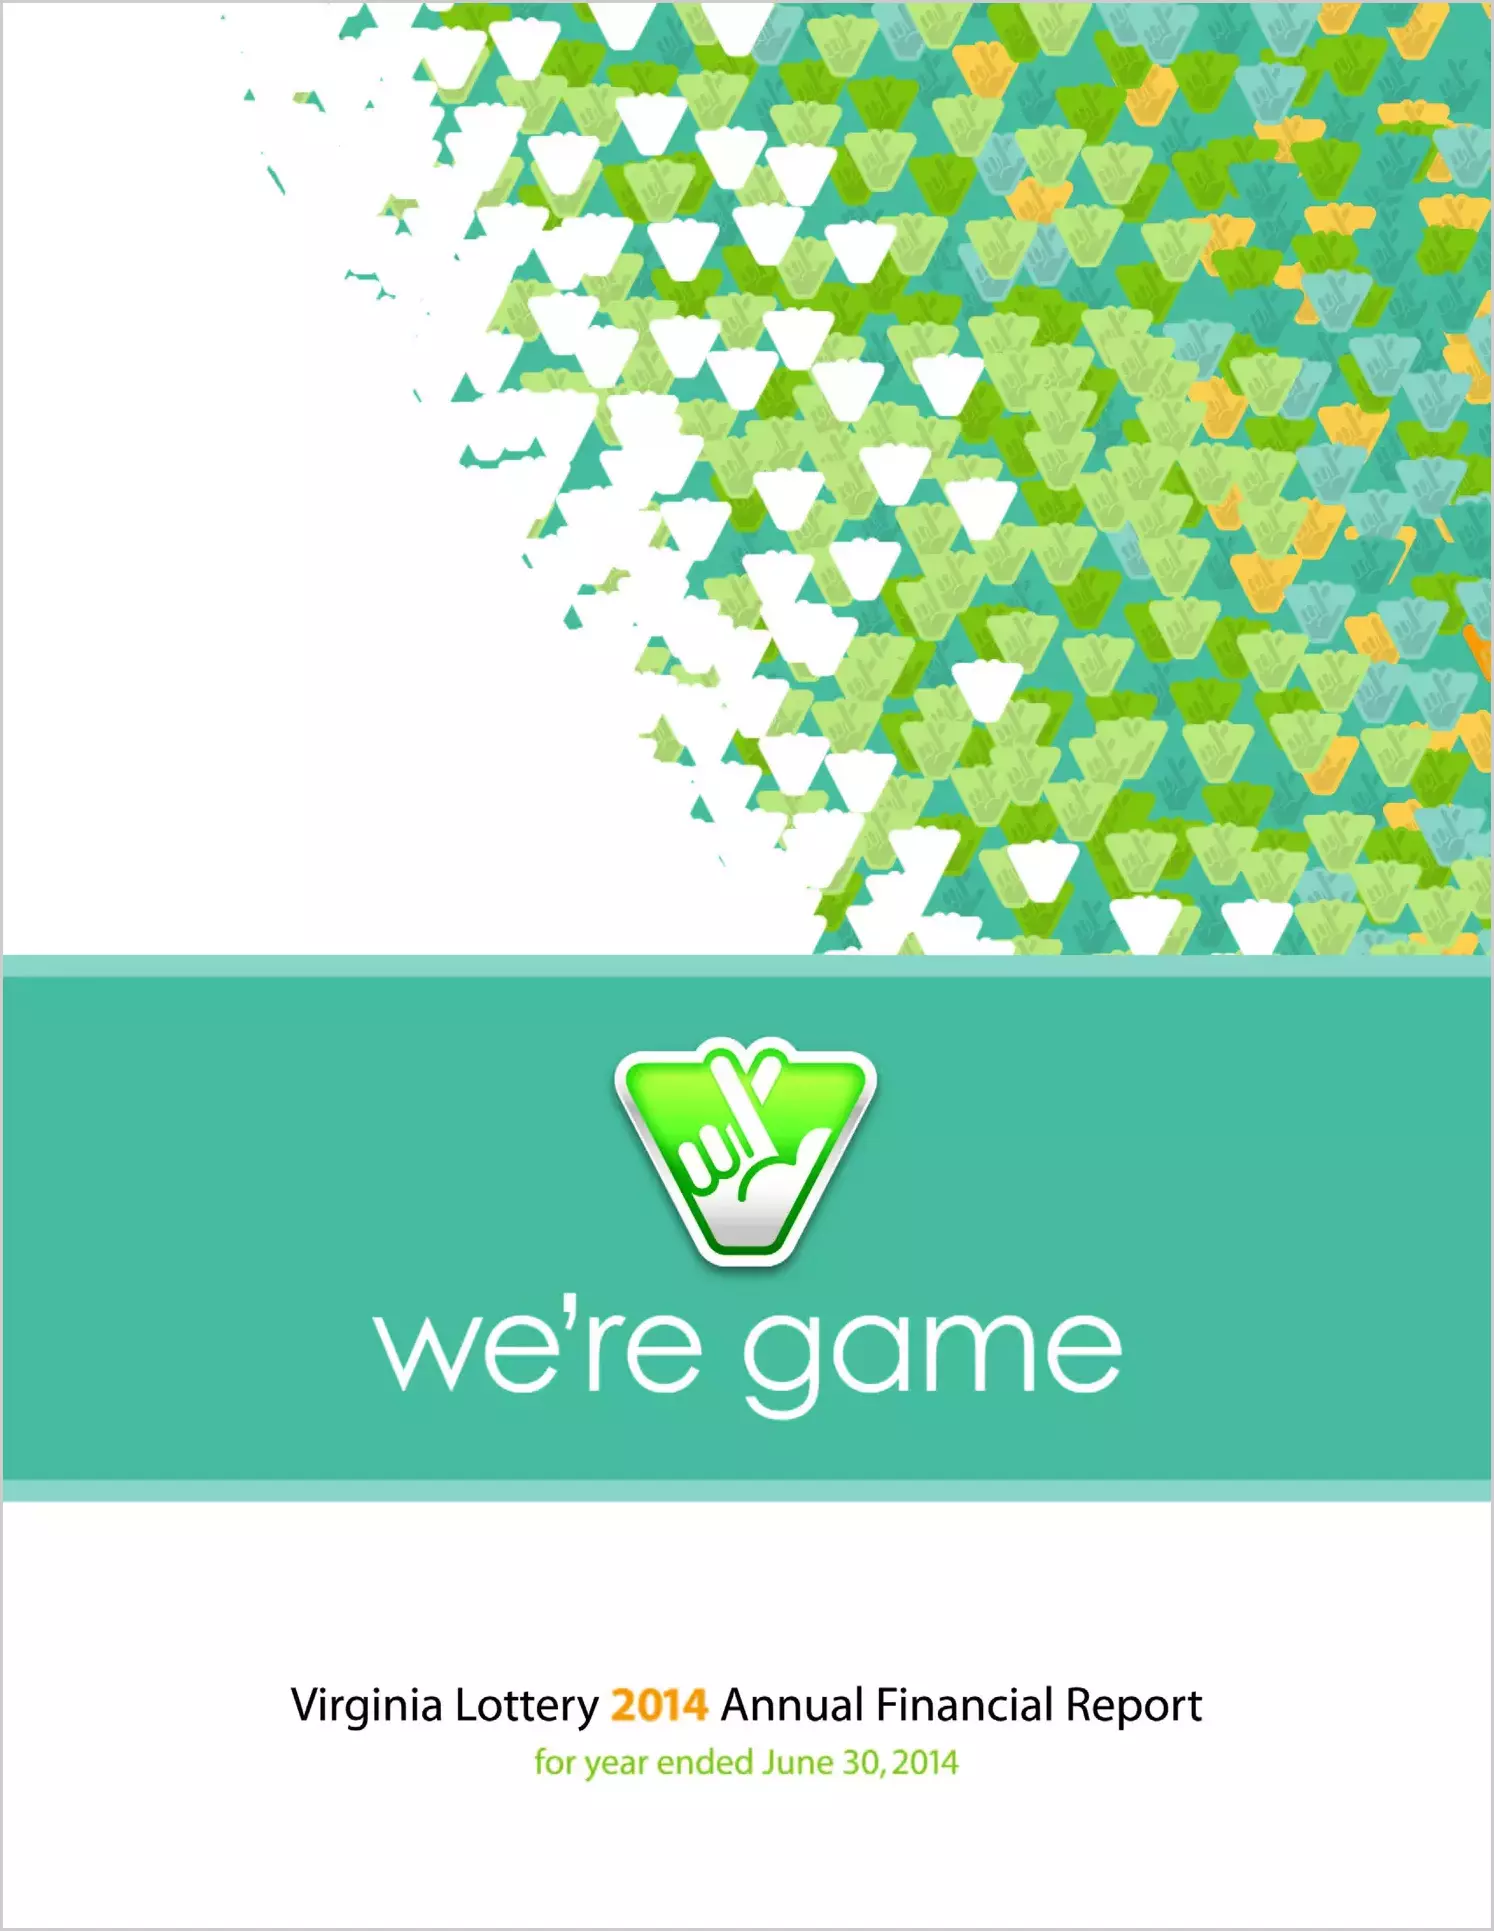 Virginia State Lottery Department Financial Statement Report  for the year ended June 30, 2014